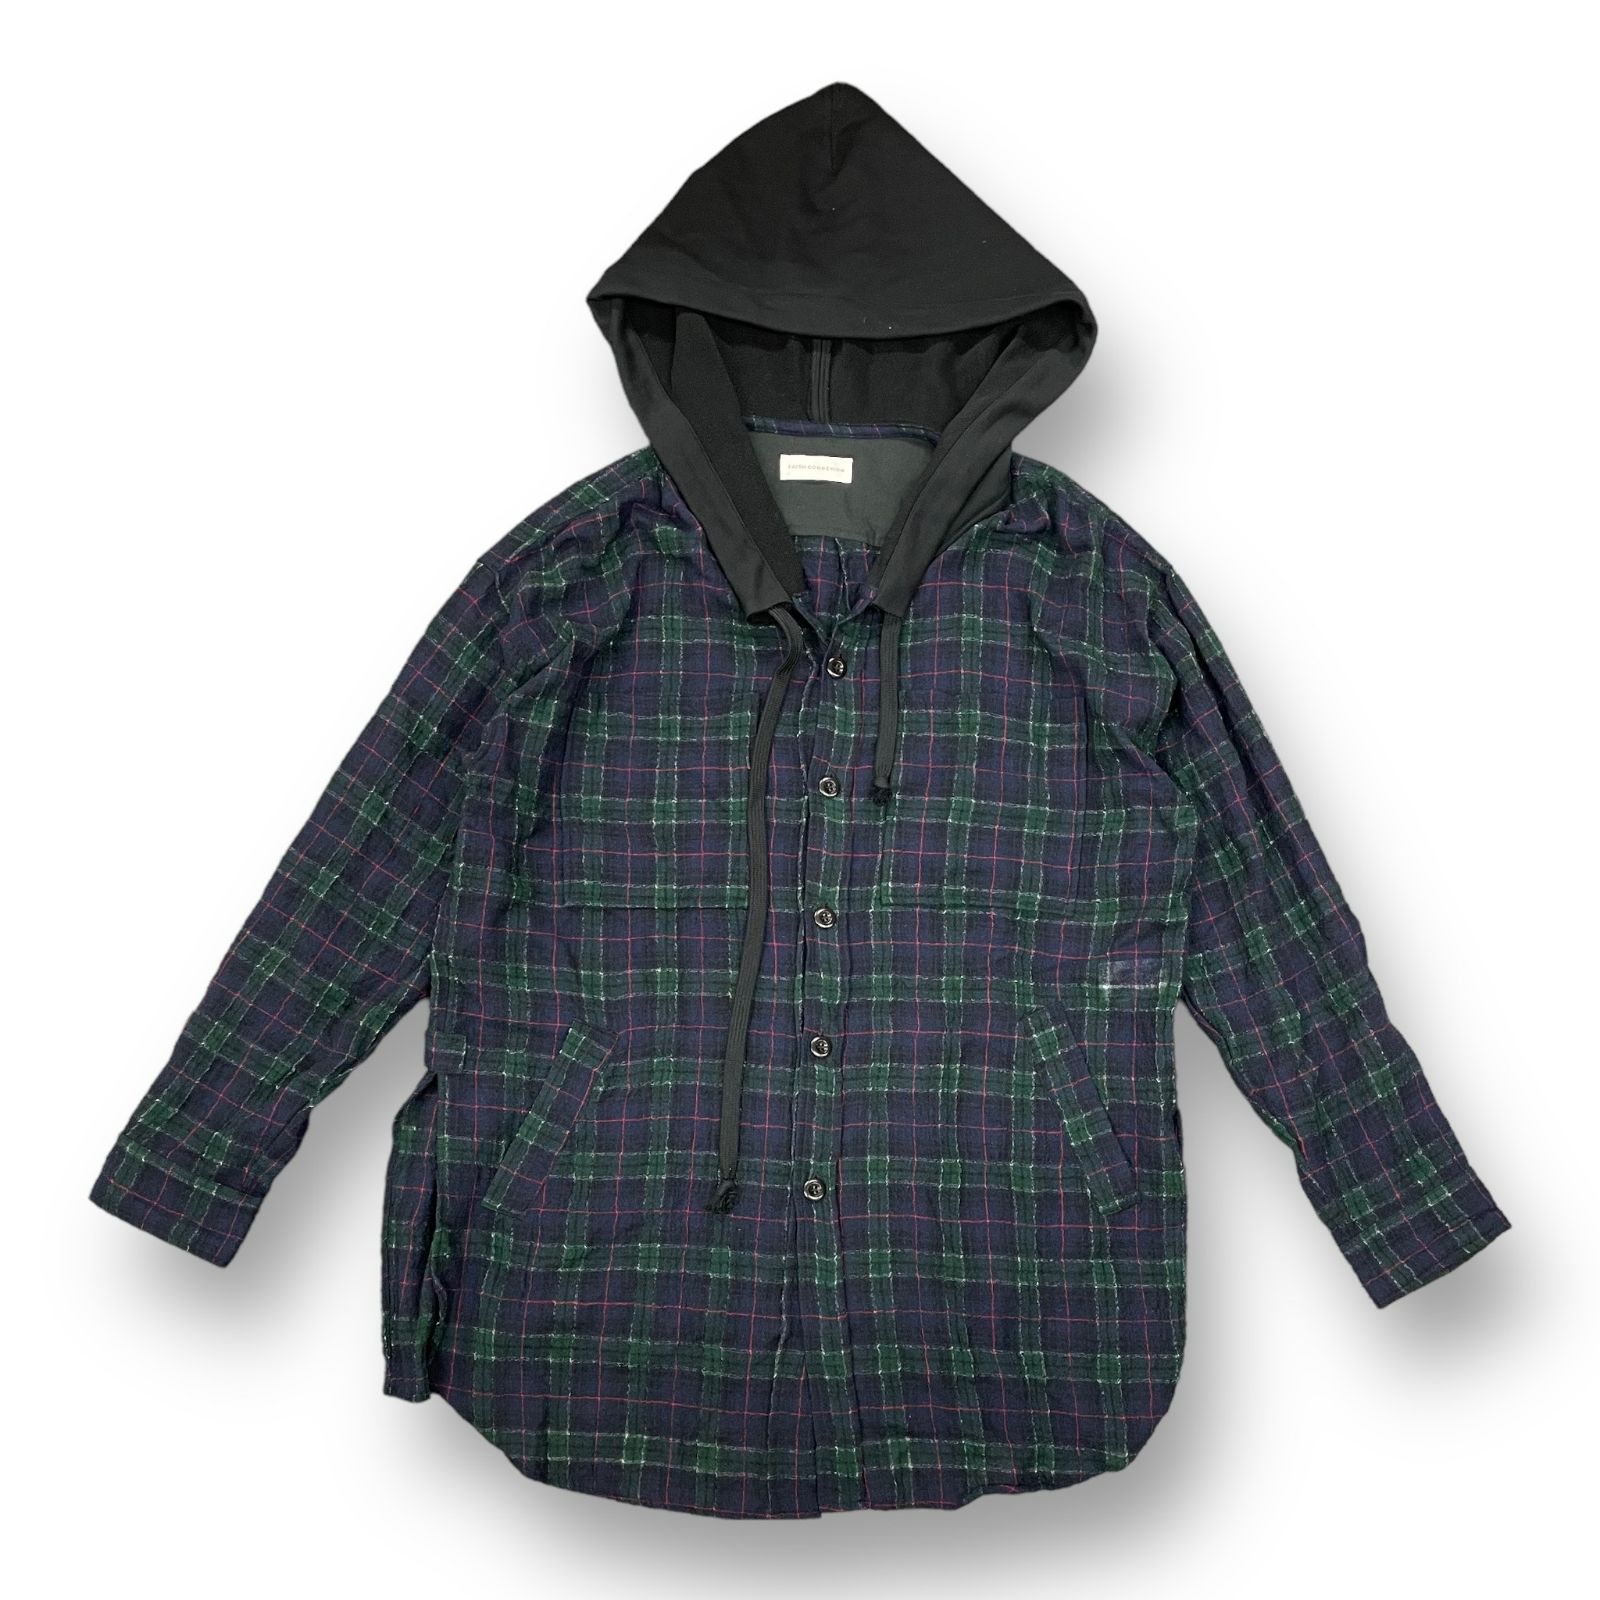 FAITH CONNEXION 18SS Checked Hooded Shirt チェック フード シャツ ...